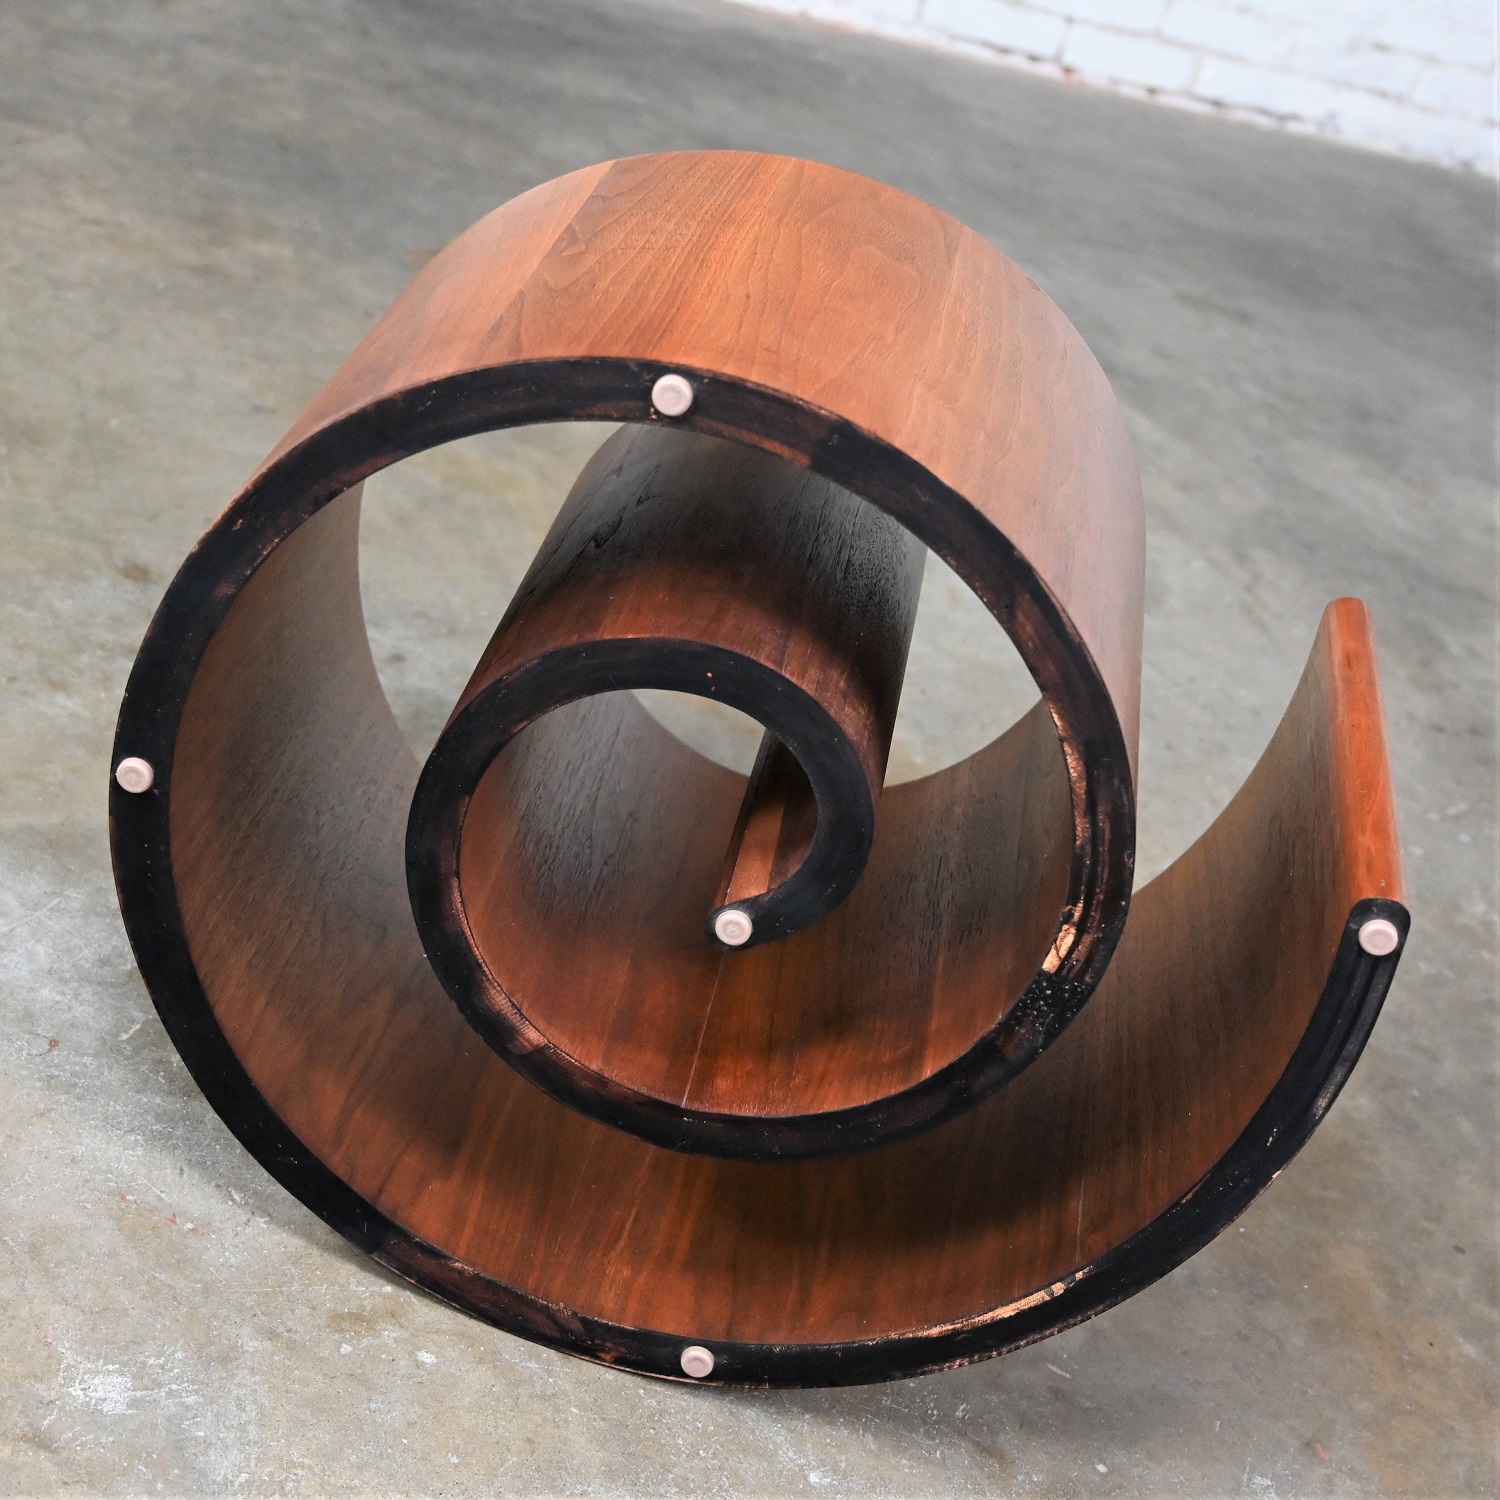 Mid-20th Century Mid-Century Modern Coffee Table Walnut Spiral or Snail Pedestal with Glass Top